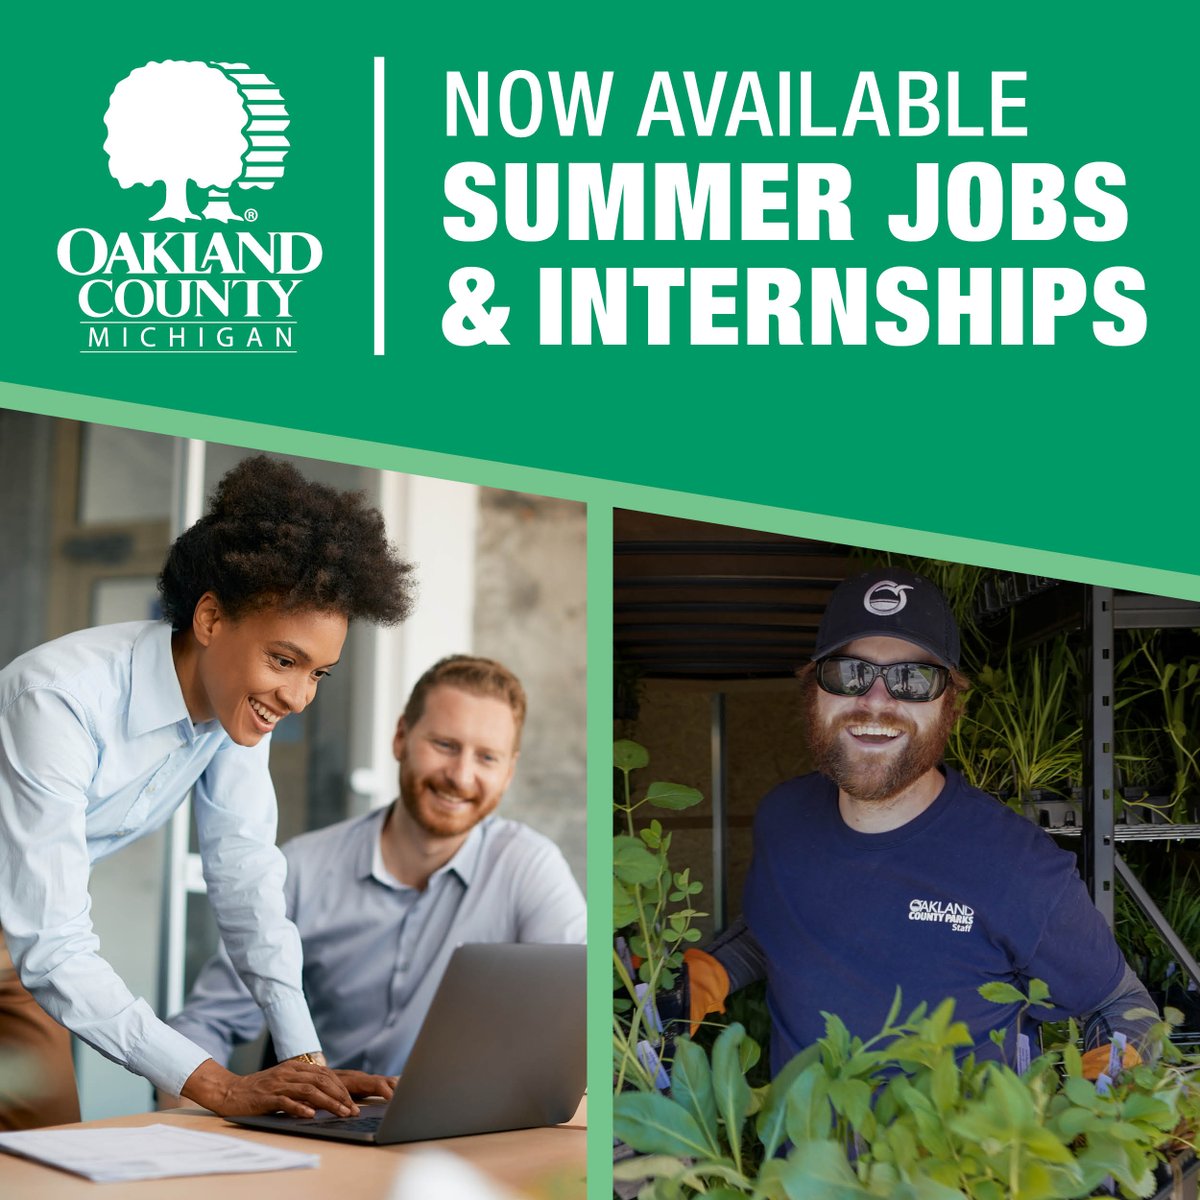 Local youth can earn money, make friends, and gain experience with a summer job or internship with #OaklandCounty. Several seasonal positions are still available including attendants and lifeguards at @OCParksAndRec! Apply: oakgov.com/jobs.